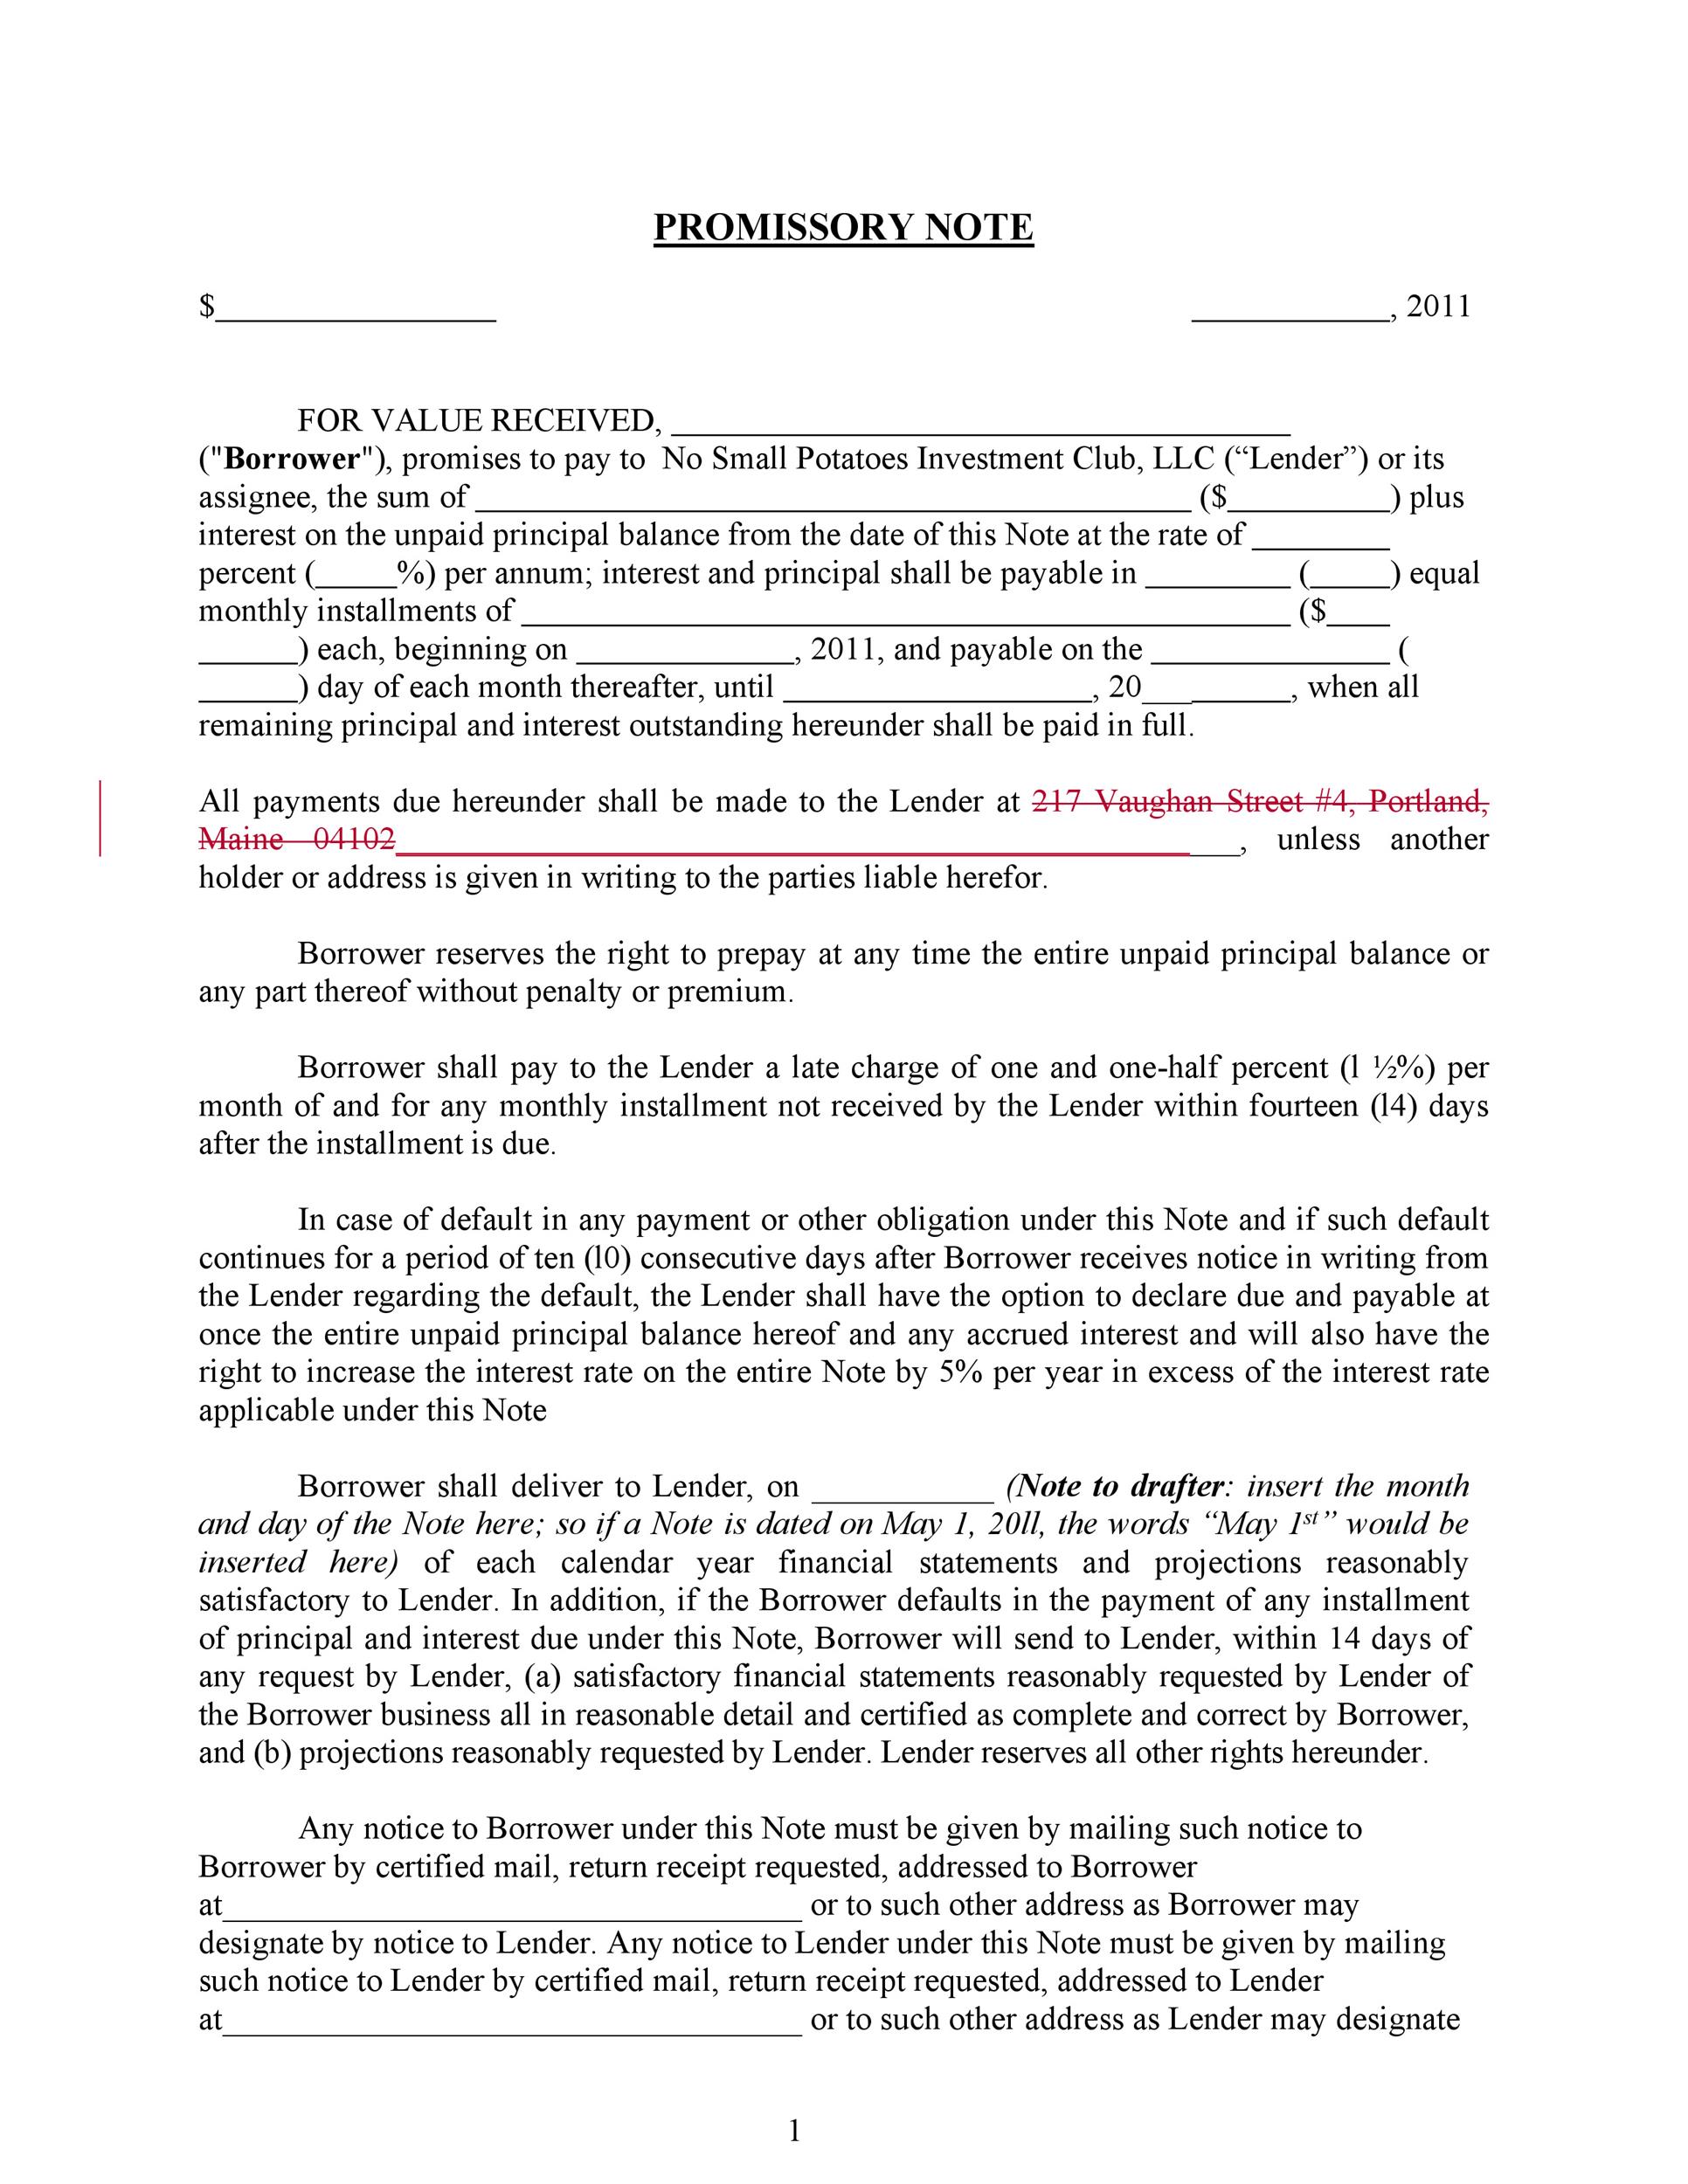 Free promissory note template 44